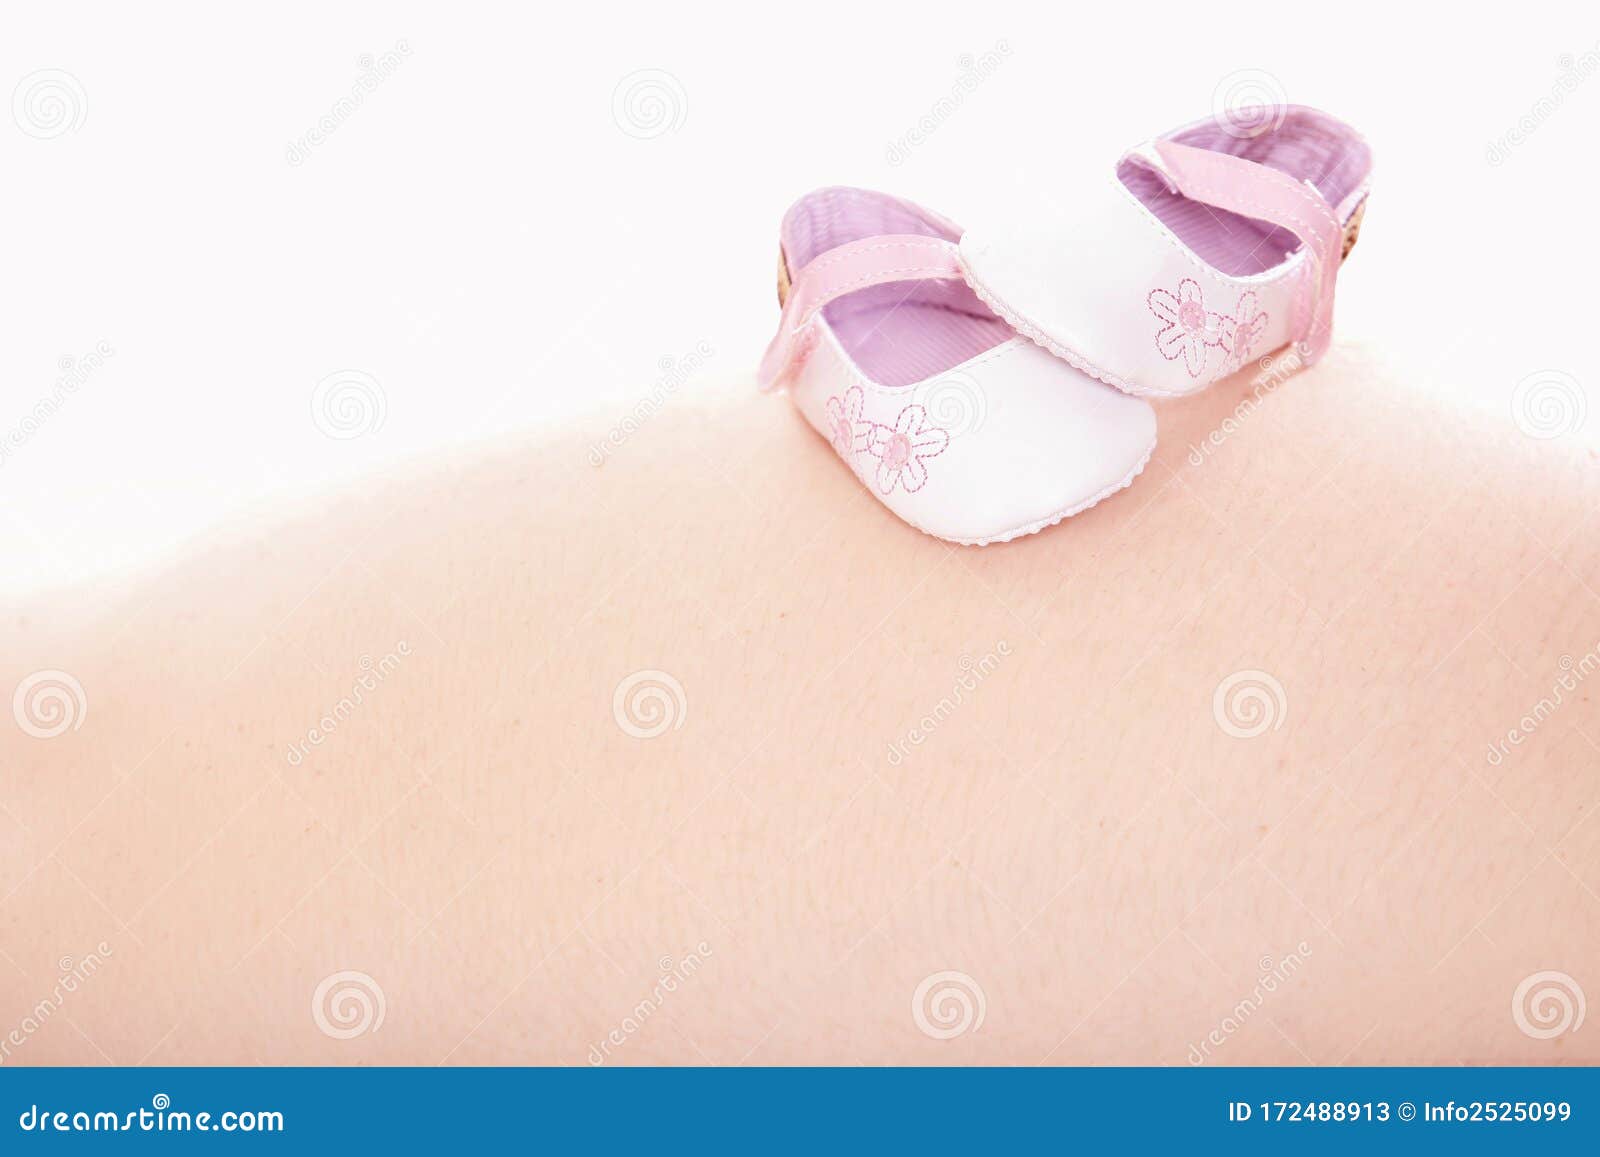 close up of pink baby shoes on white background